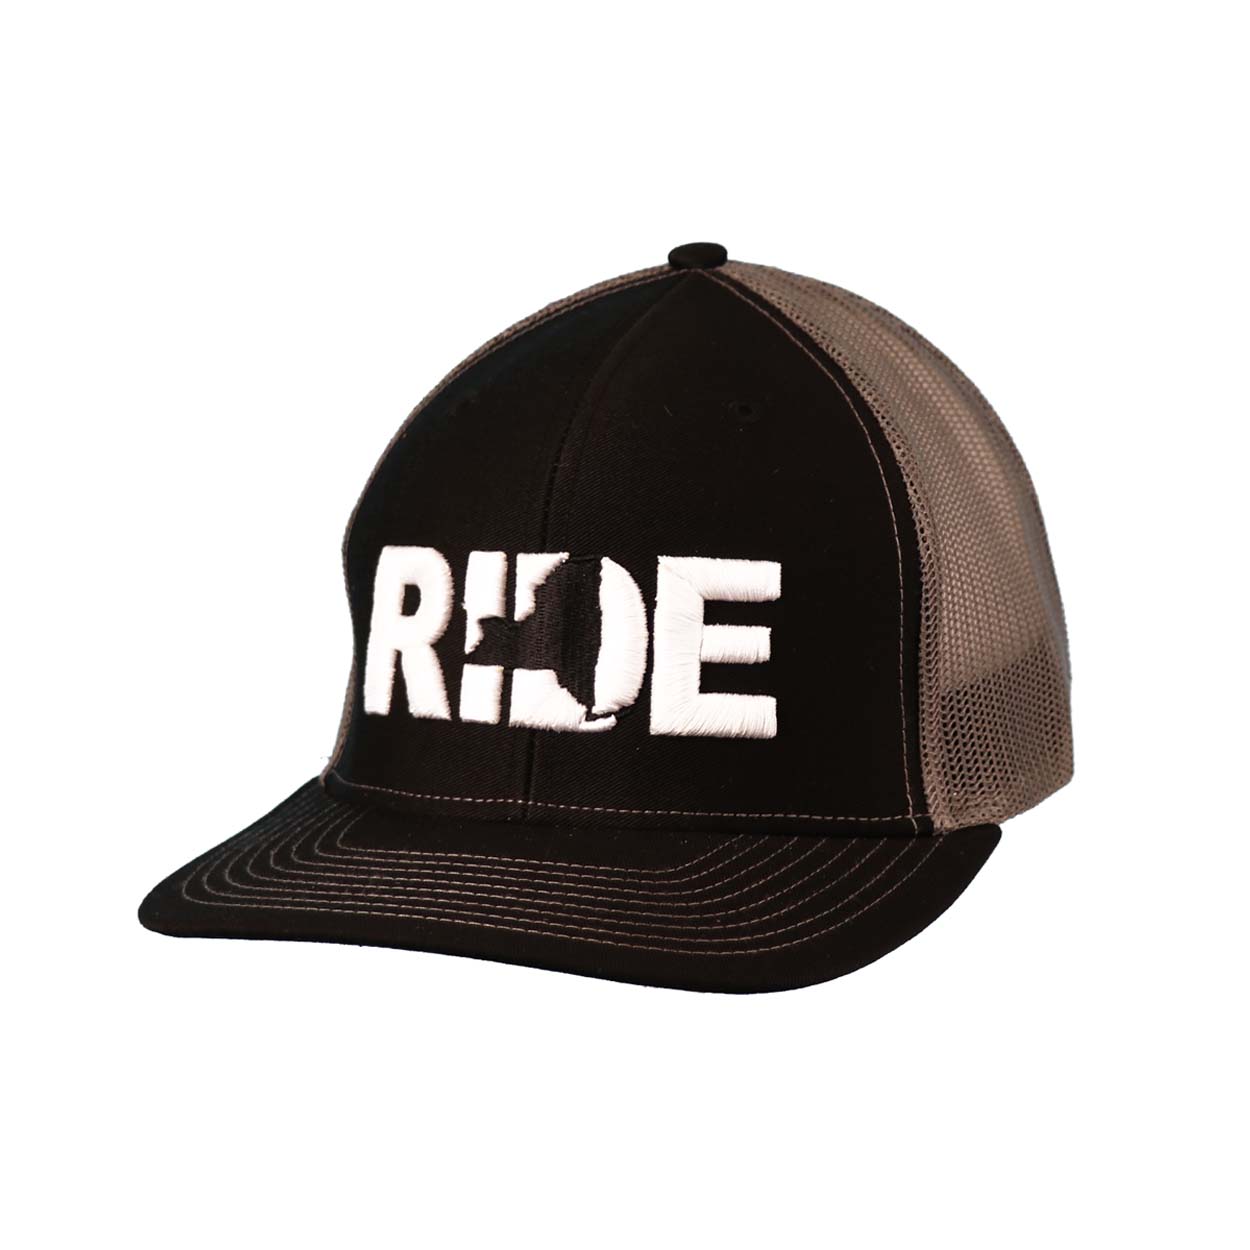 Ride New York Classic Pro 3D Puff Embroidered Snapback Trucker Hat Black/Gray